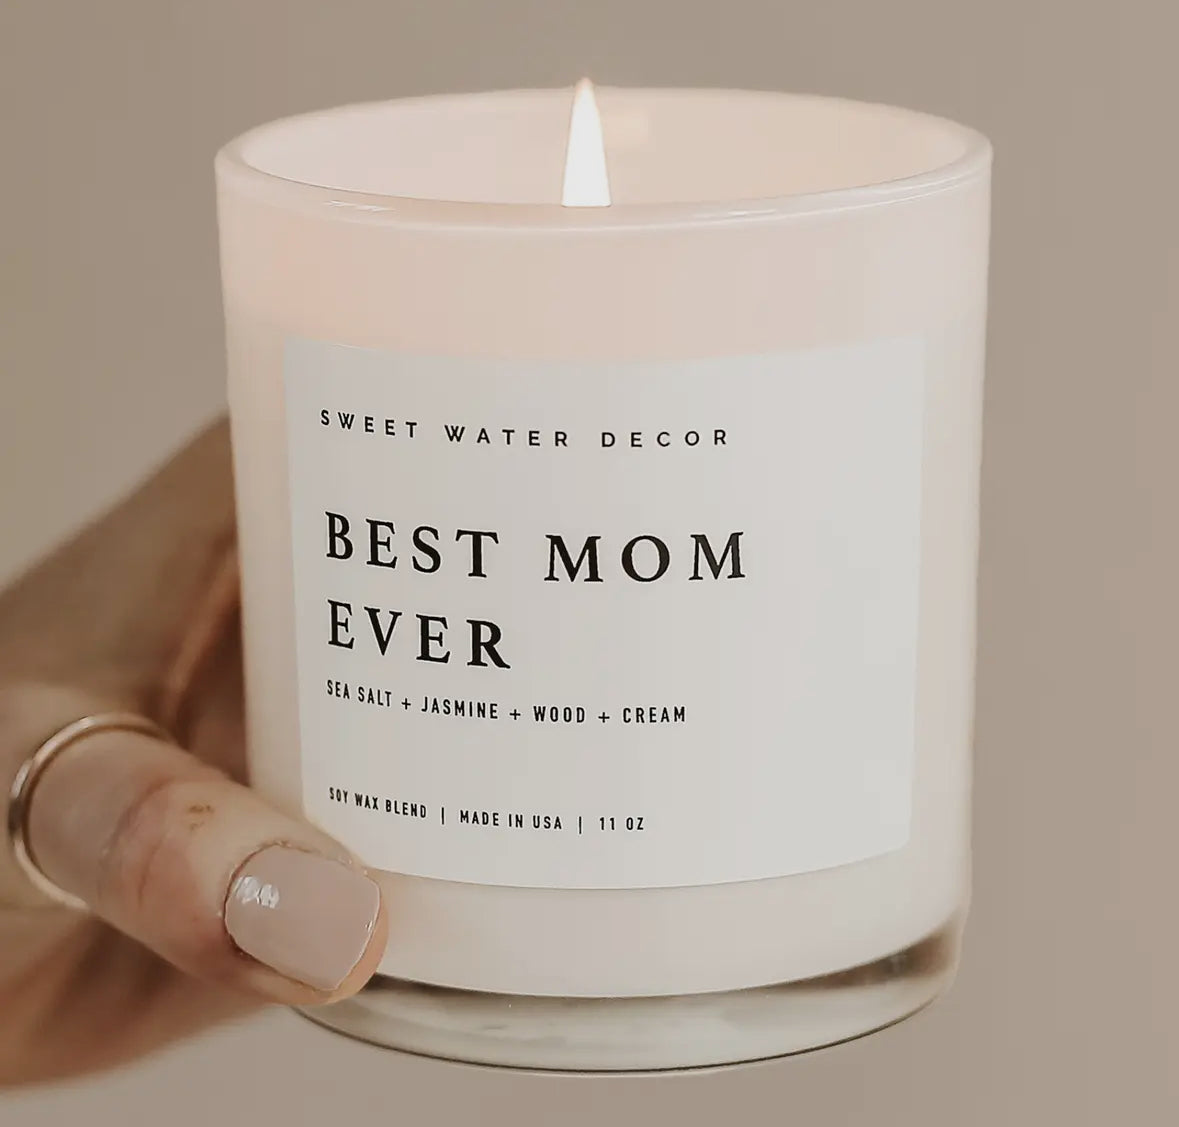 Best Mom Ever! 11 oz. Soy Candle